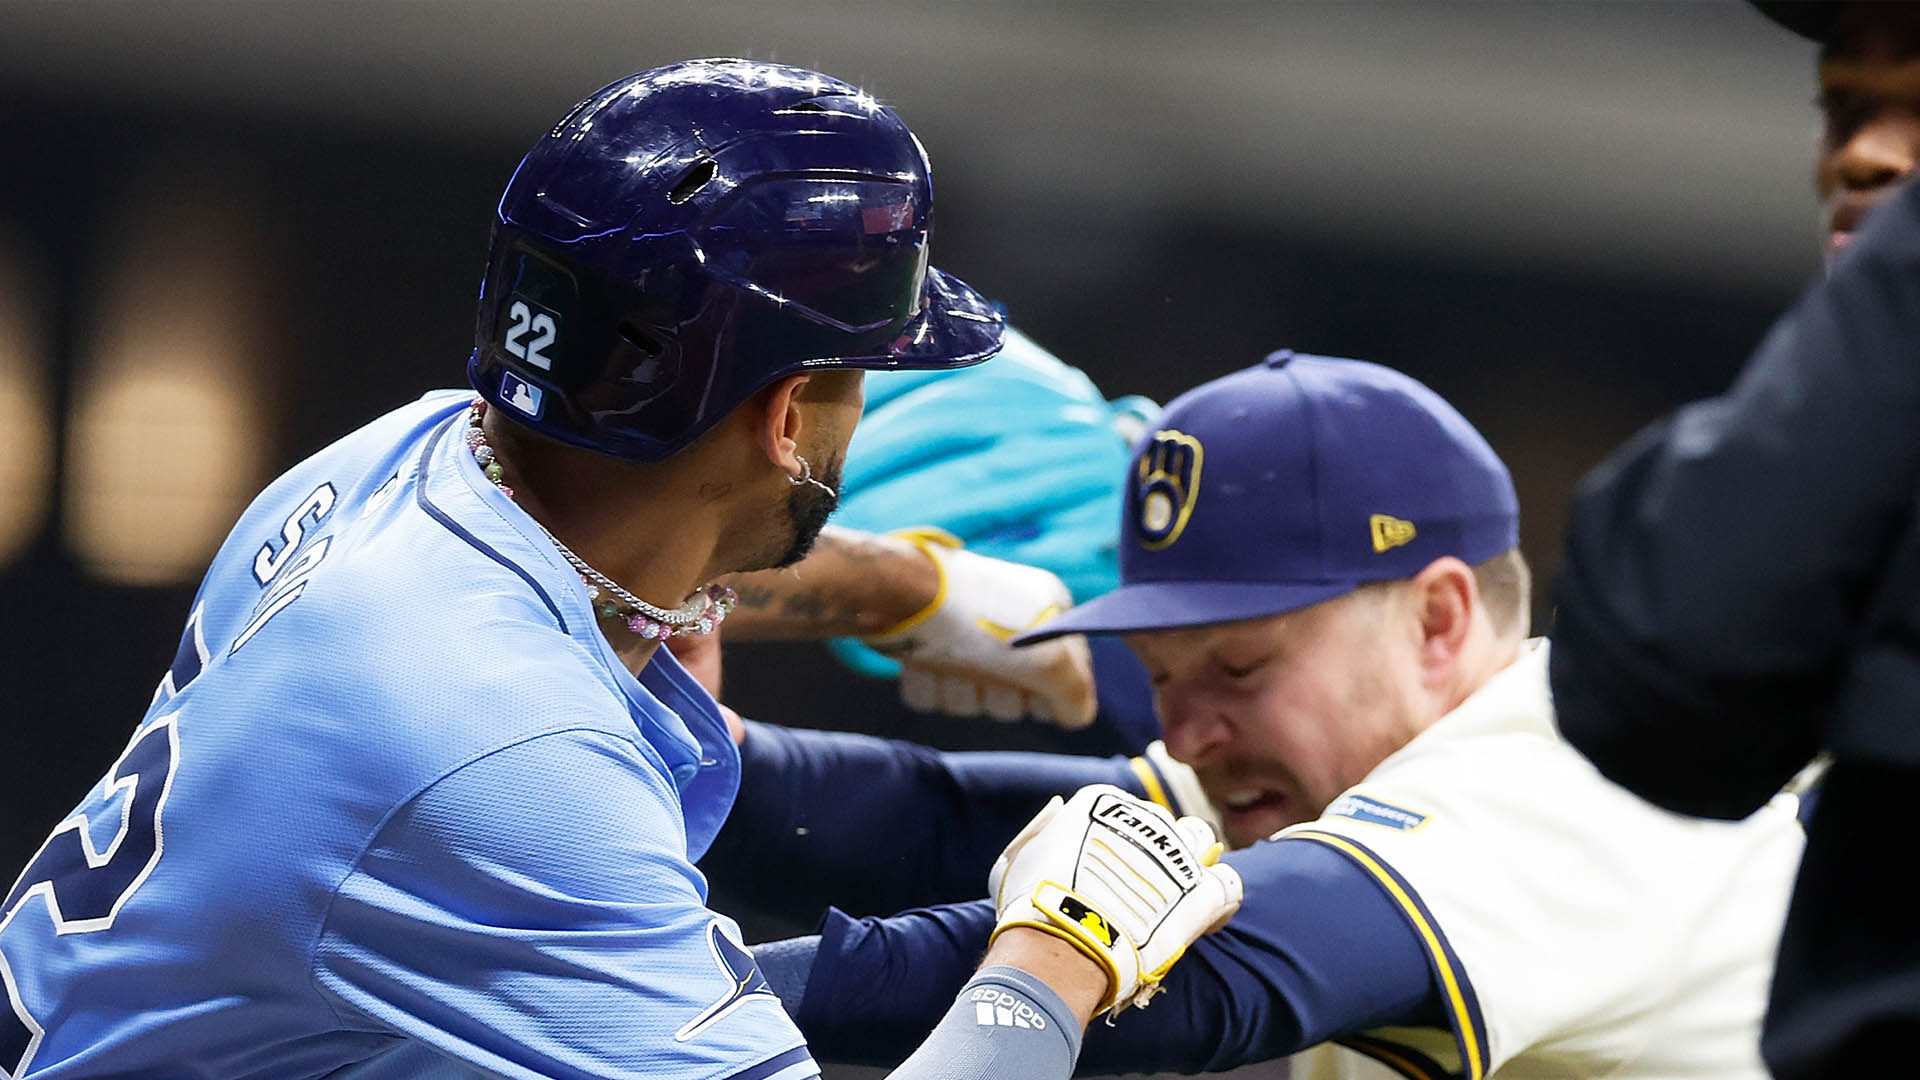 Tampa Bay Rays and Milwaukee Brewers players fight in bench-clearing brawl